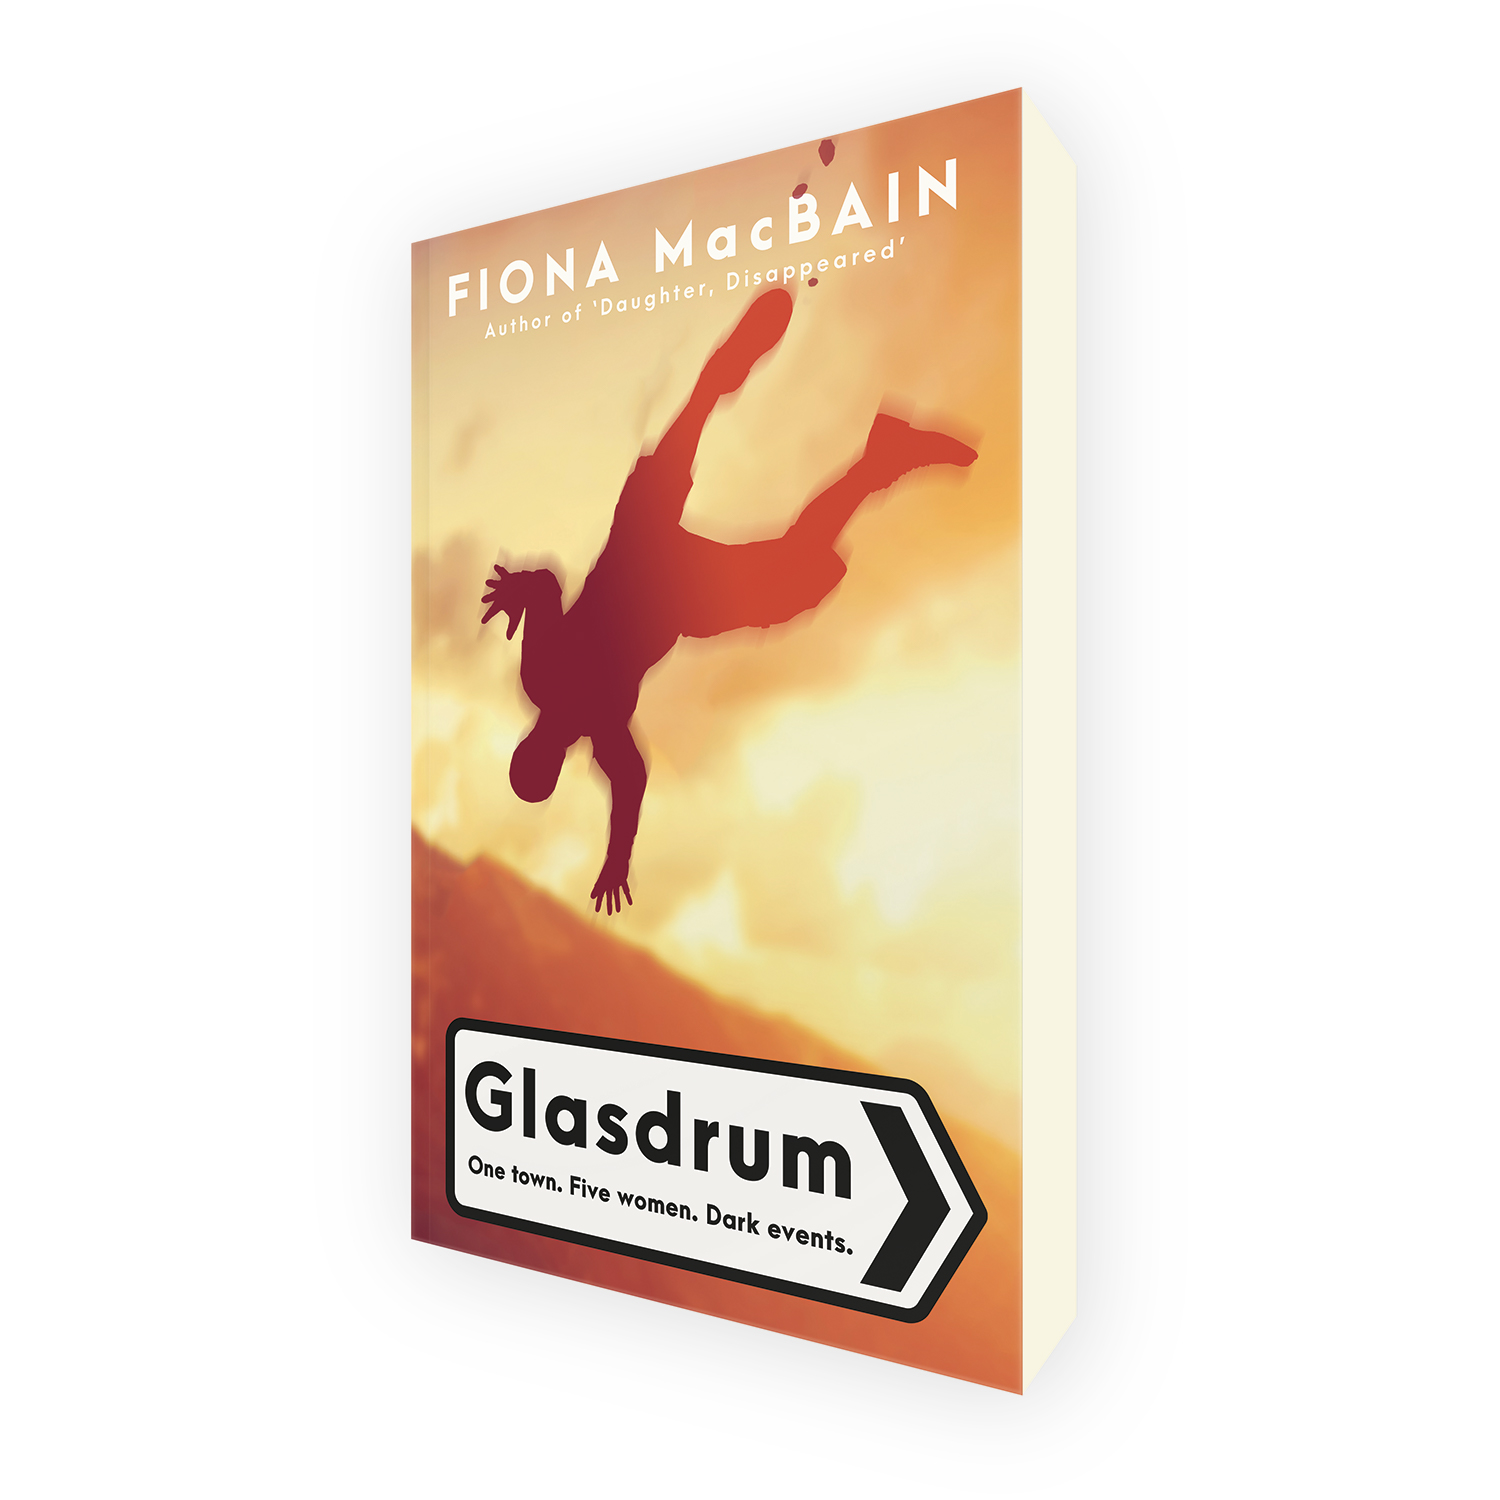 'Glasdrum' is a darkly-humoured thriller, set in the Highlands of Scotland, by author Fiona MacBain. The book cover & interior were designed by Mark Thomas, of coverness.com. To find out more about my book design services, please visit www.coverness.com.